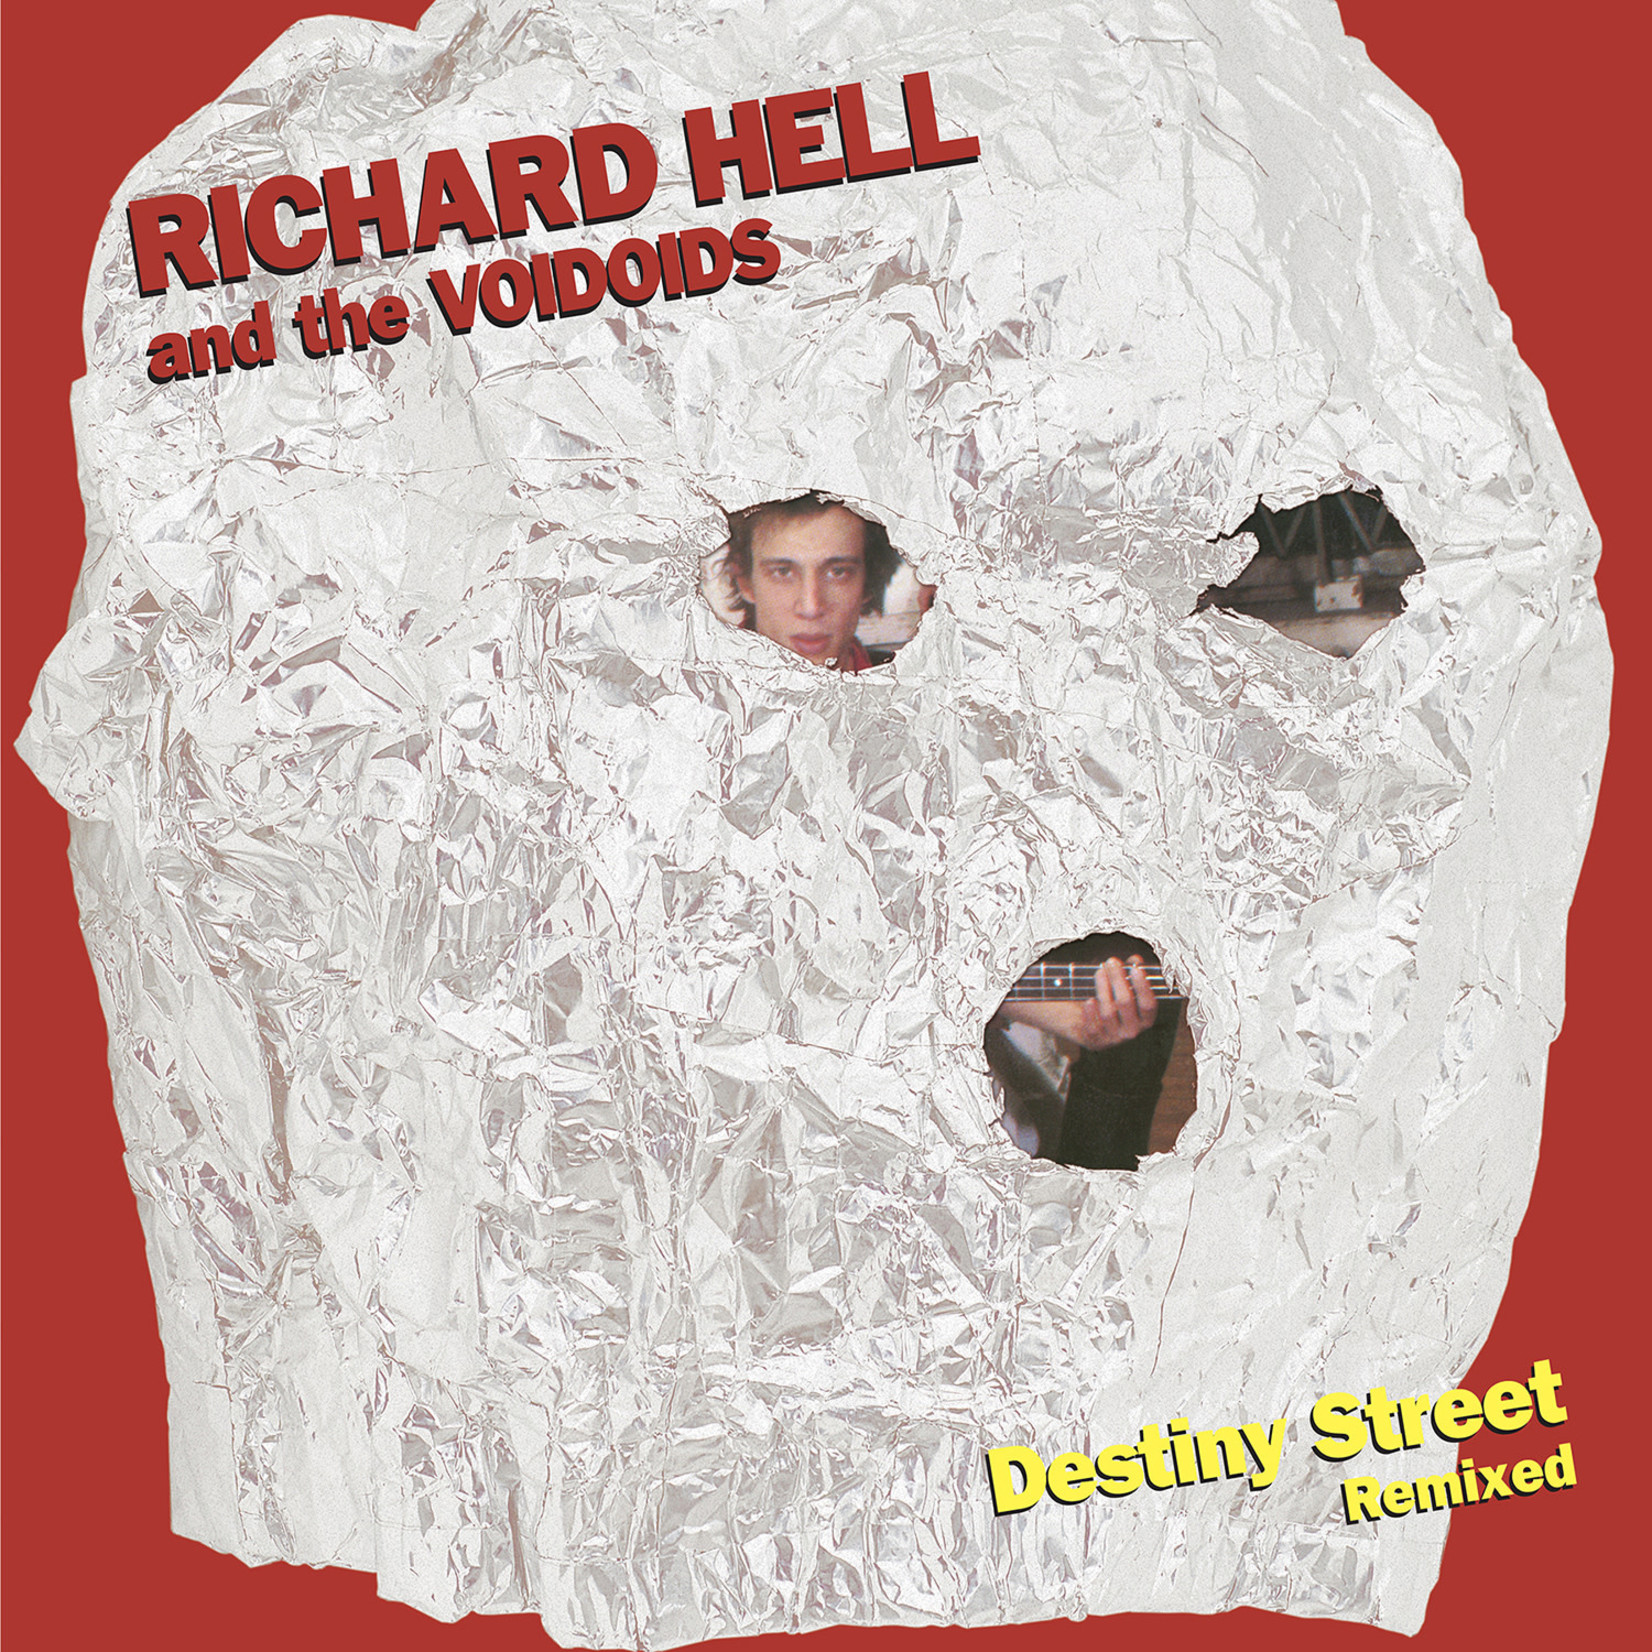 Richard Hell And The Voidiods - Destiny Street Remixed